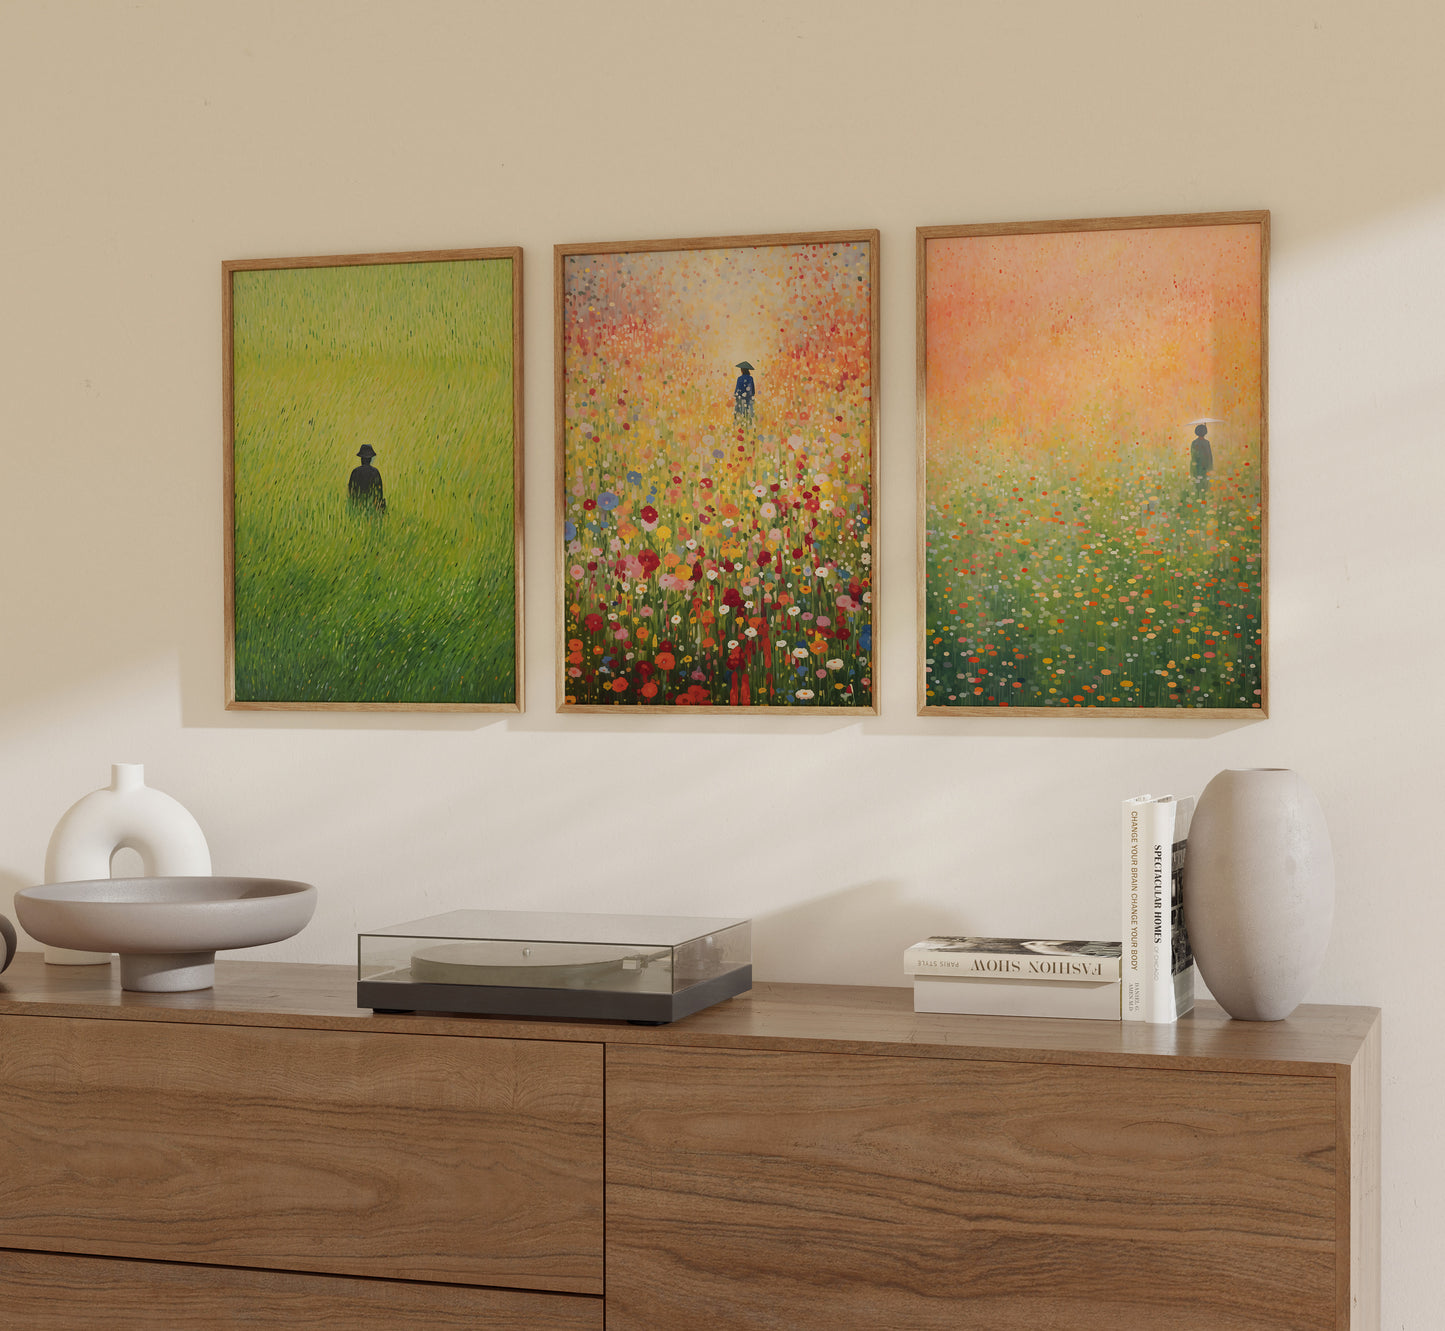 Three framed paintings depicting different floral fields on a wall above a wooden sideboard.